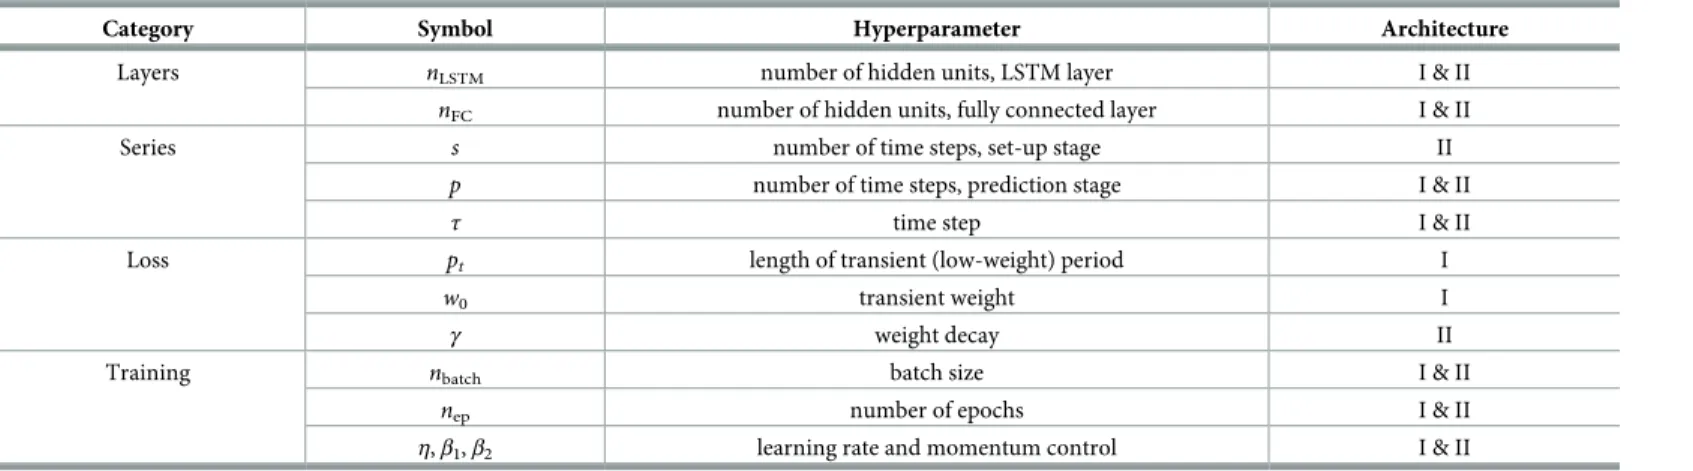 Table 1. Summary of hyperparameters for data-driven model architectures.